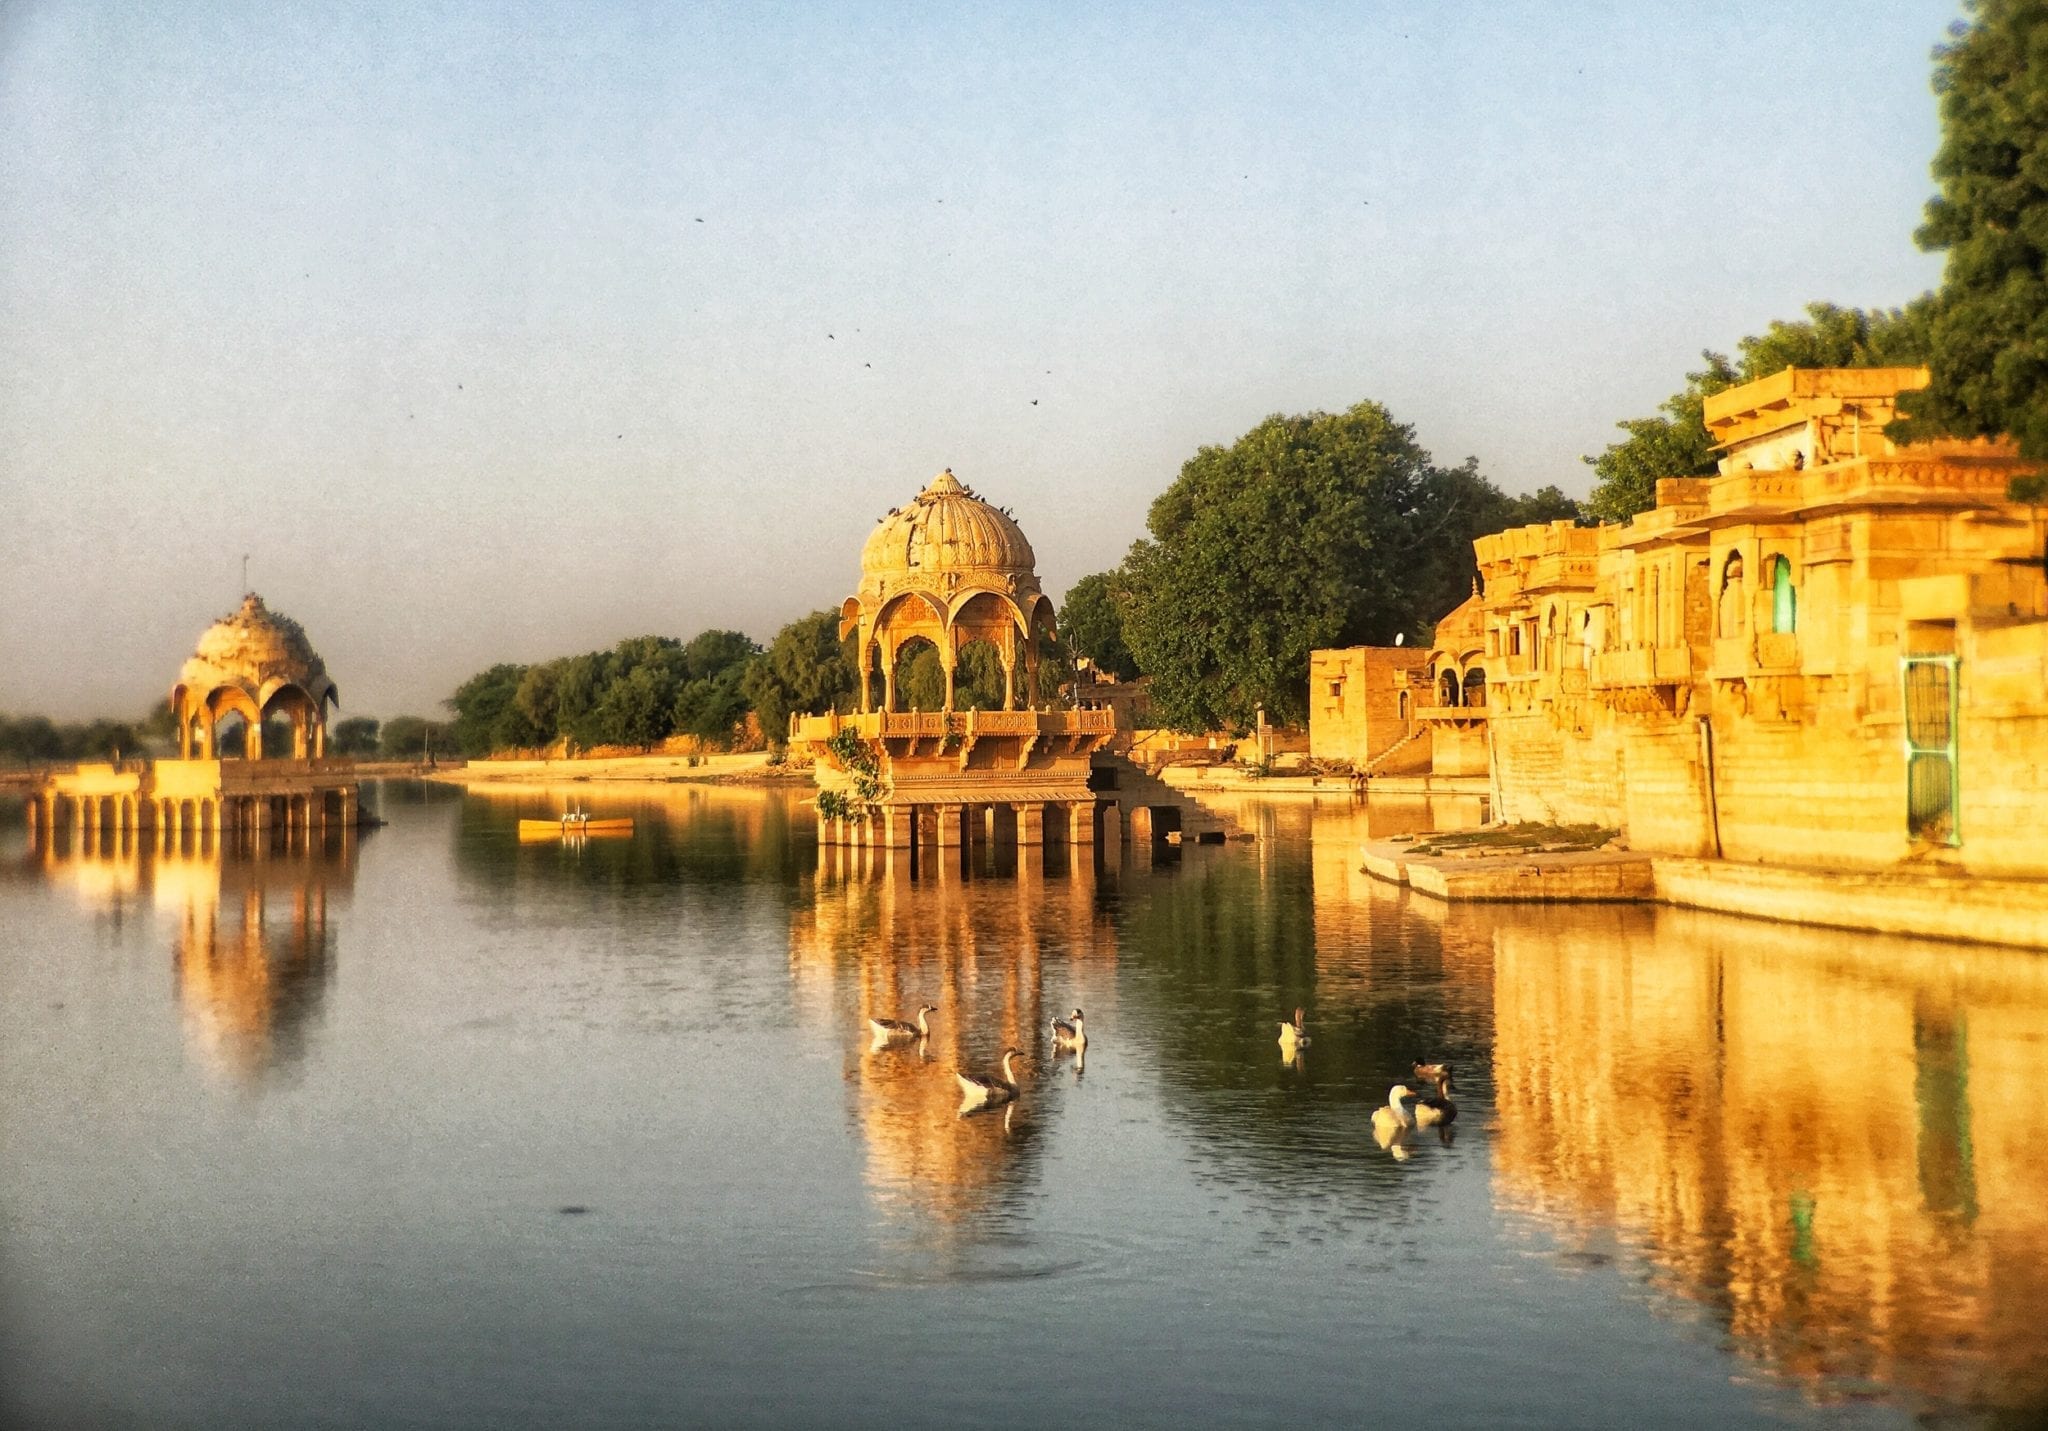 The golden buildings of Jaisalmer, Rajasthan, India, perched on the blue lake at dusk.